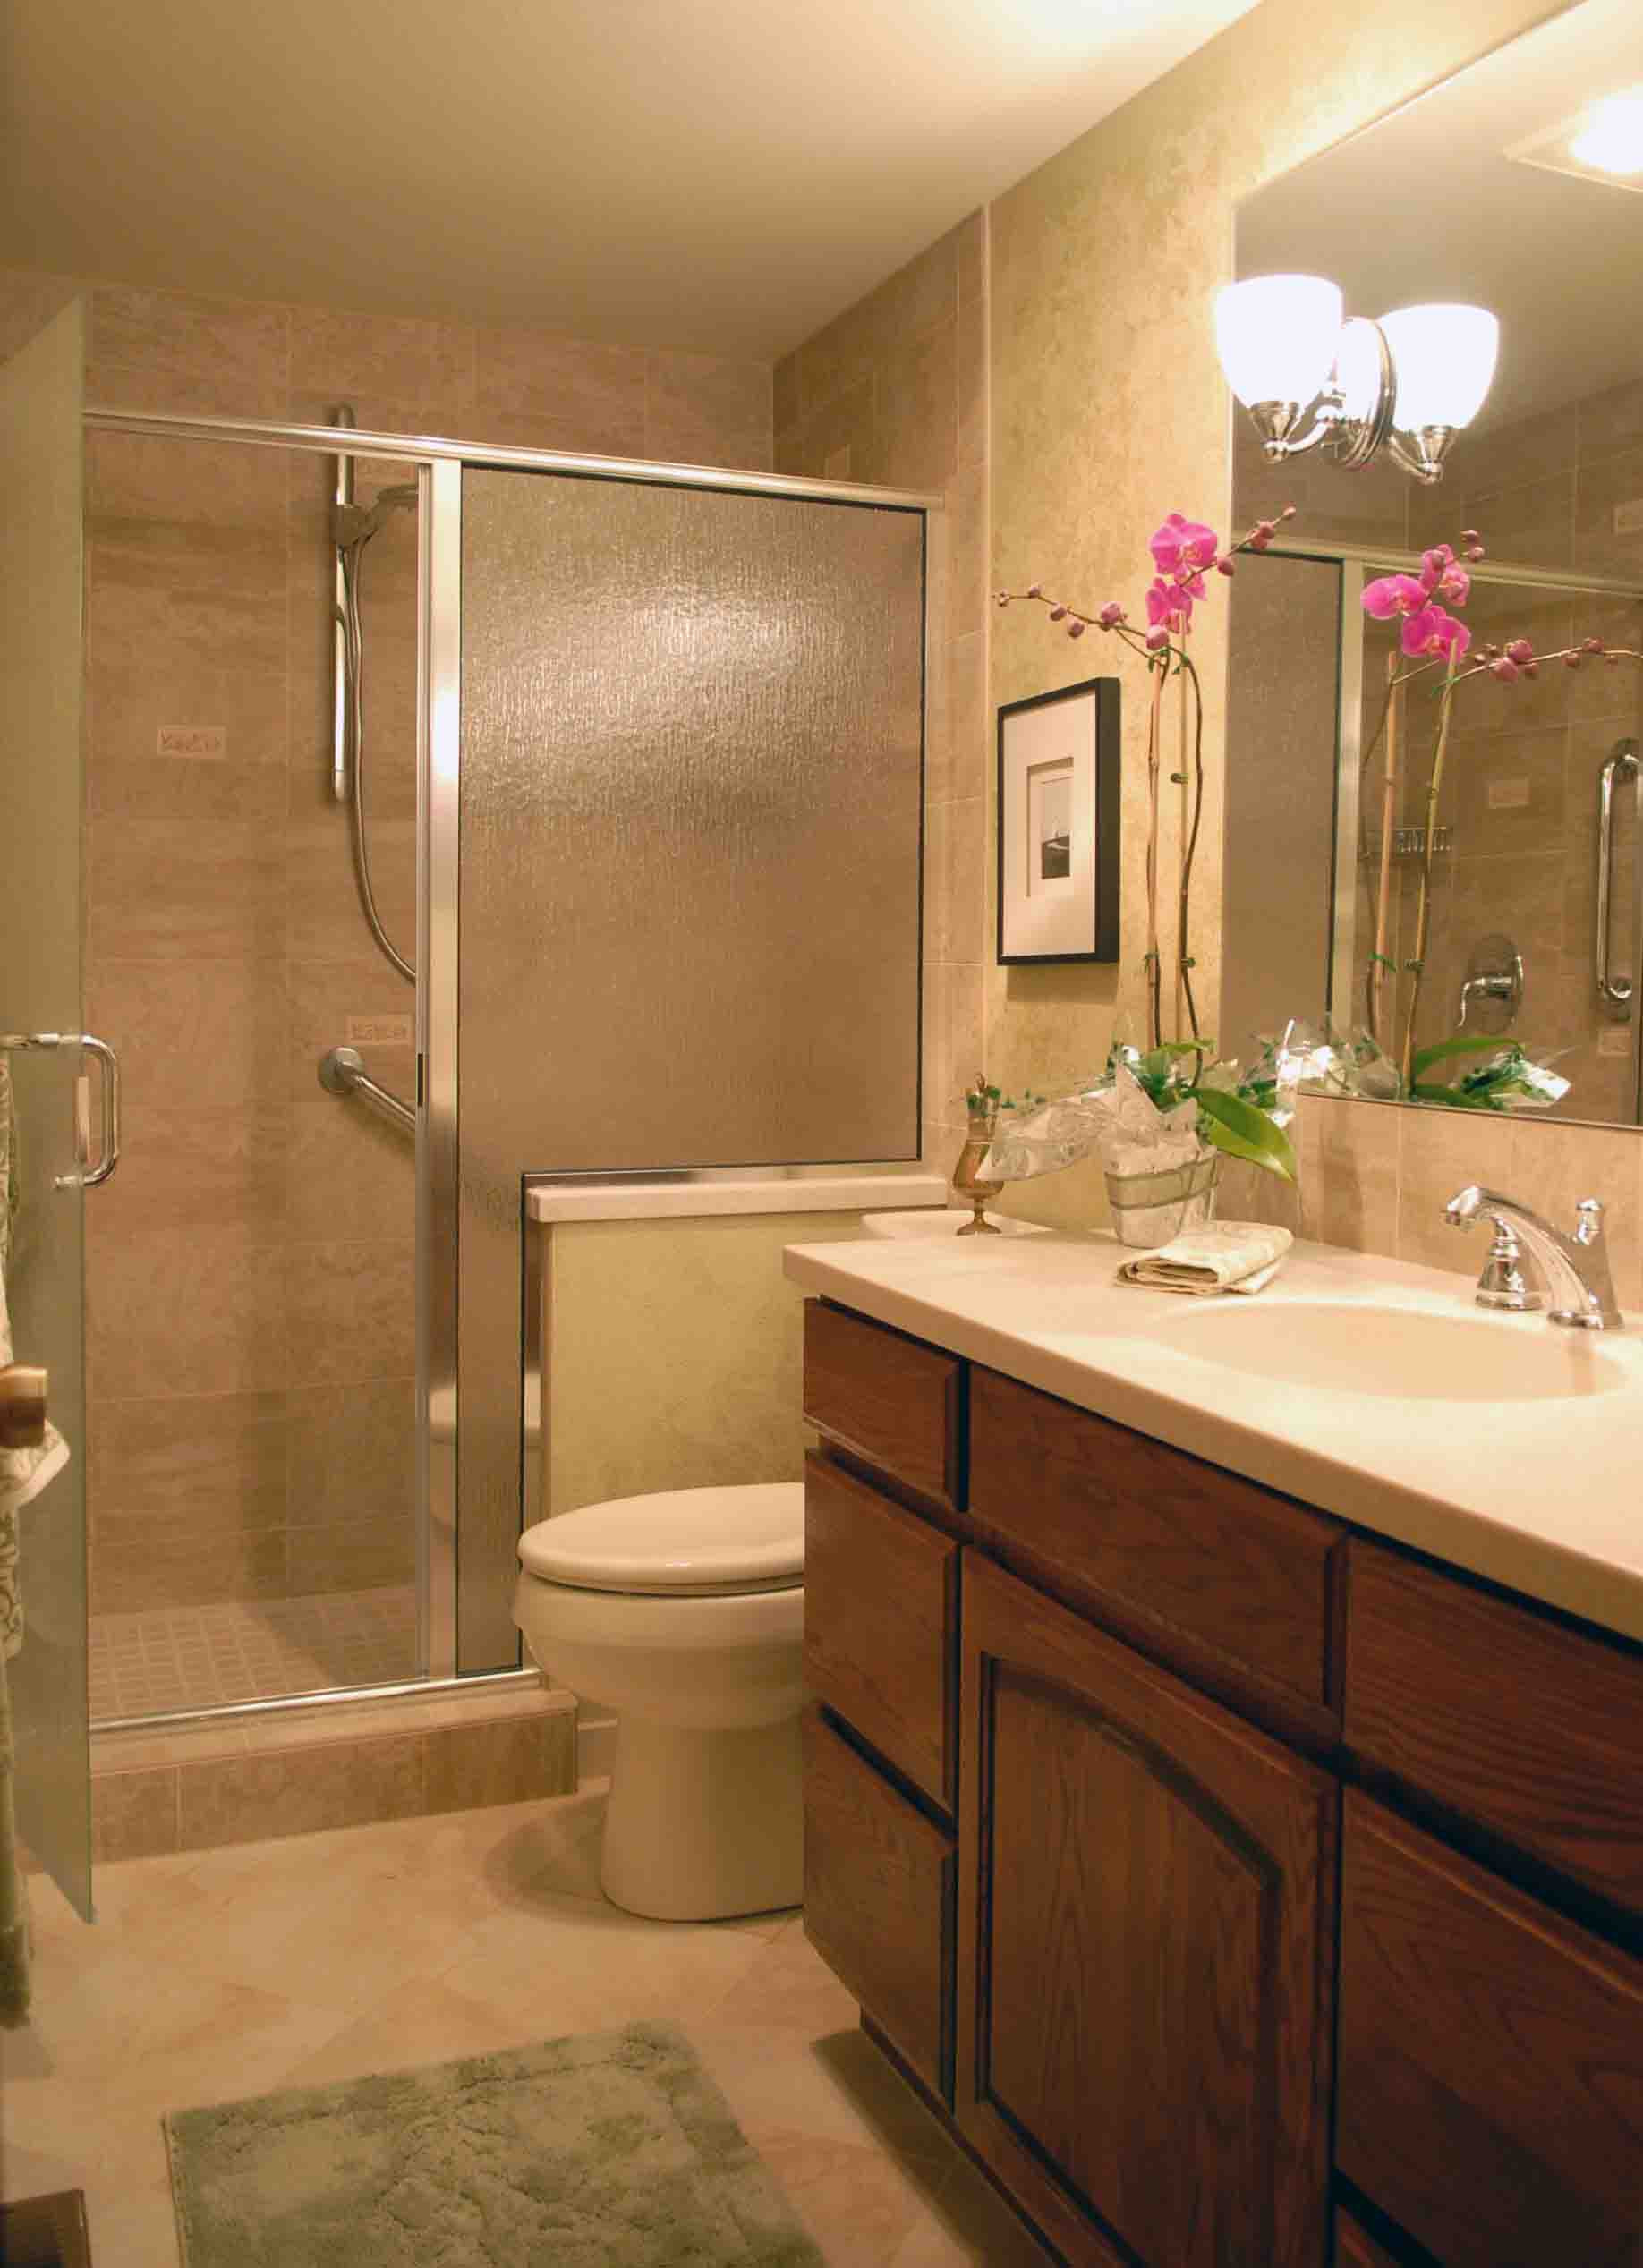 Remodeling Small Bathrooms
 Bathroom Remodeling Ideas for Small Bath TheyDesign